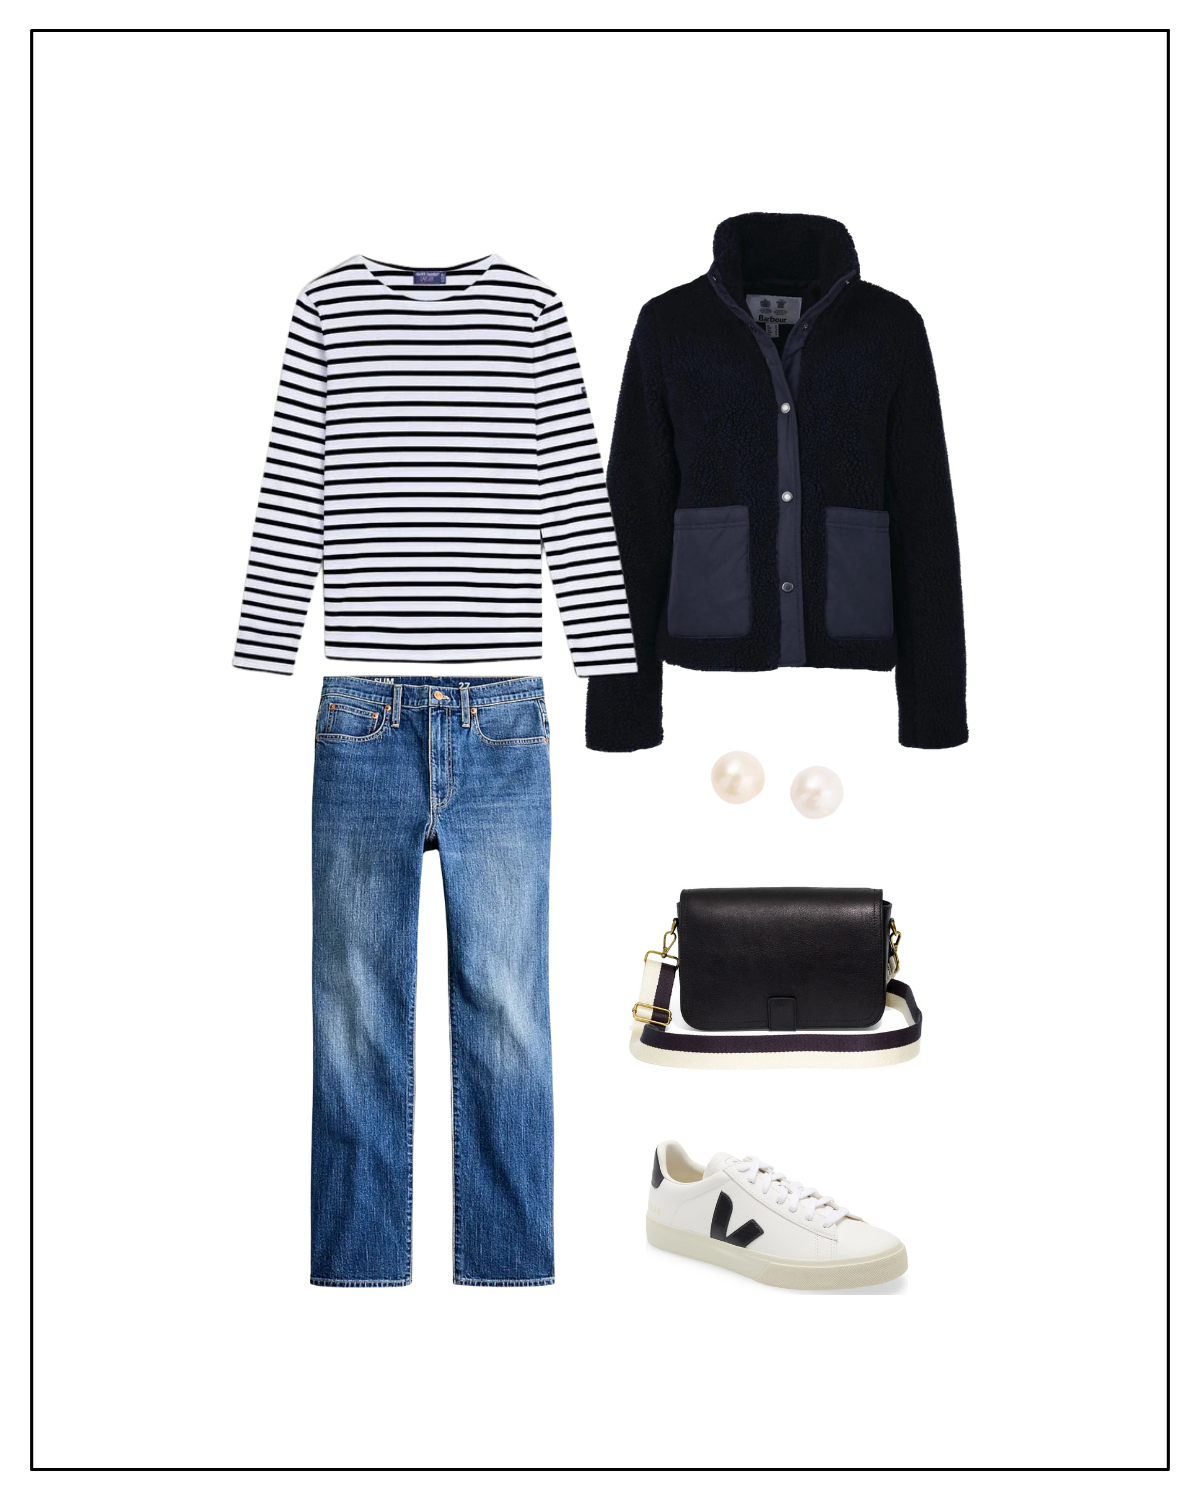 Striped T-Shirt Fall Outfits From Basics